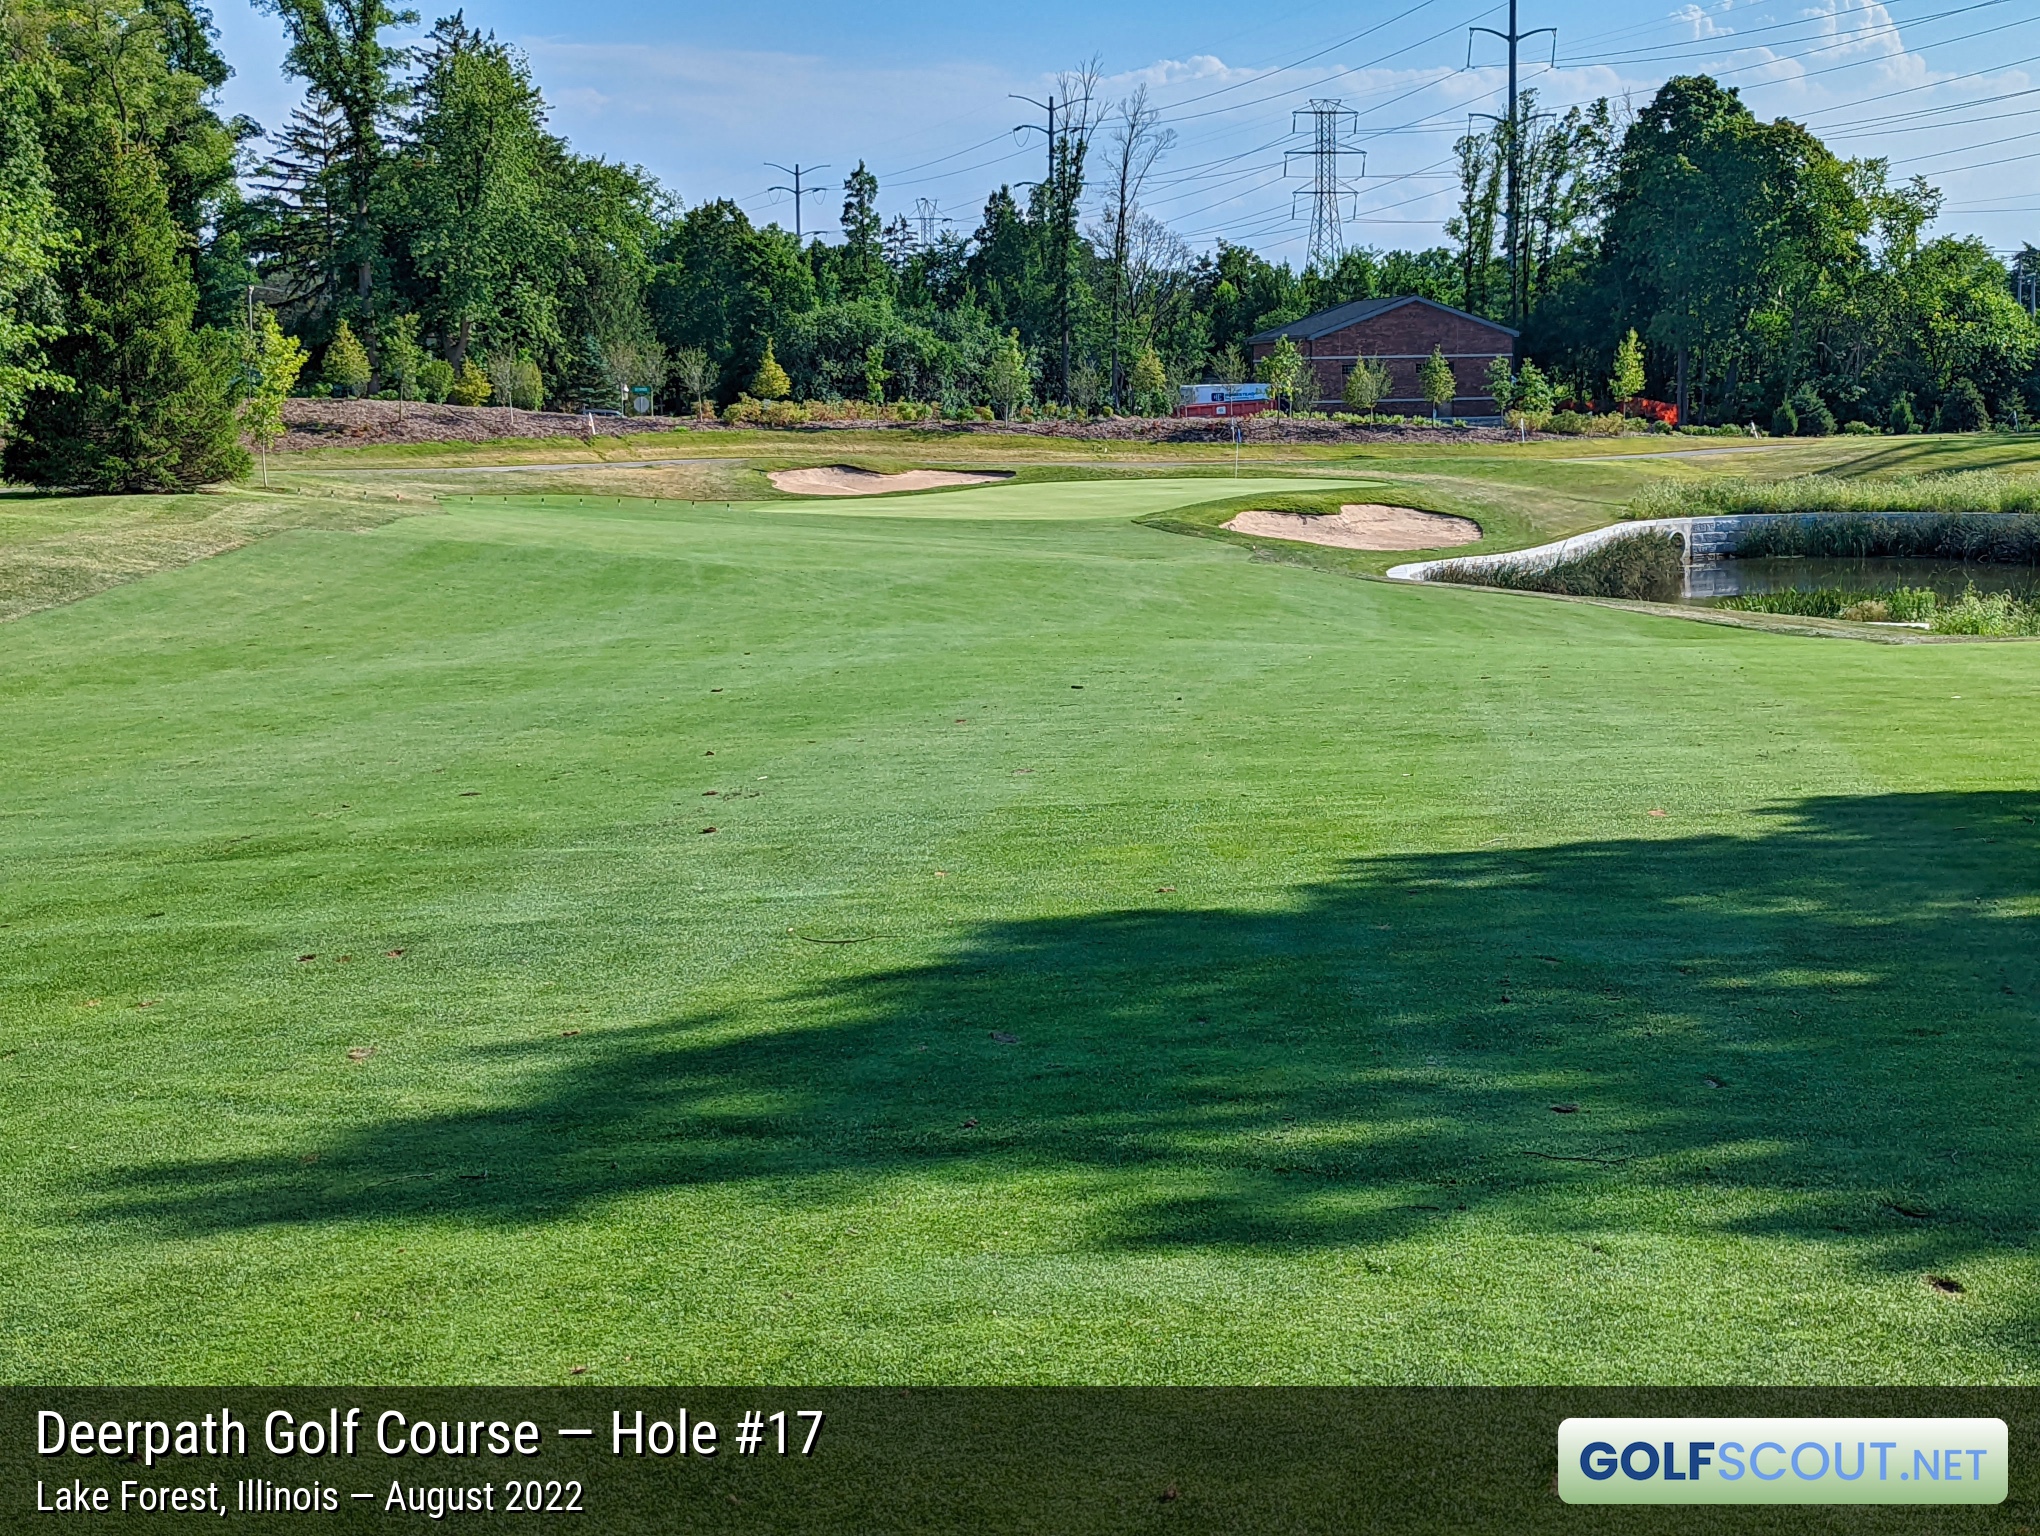 Photo of hole #17 at Deerpath Golf Course in Lake Forest, Illinois. 